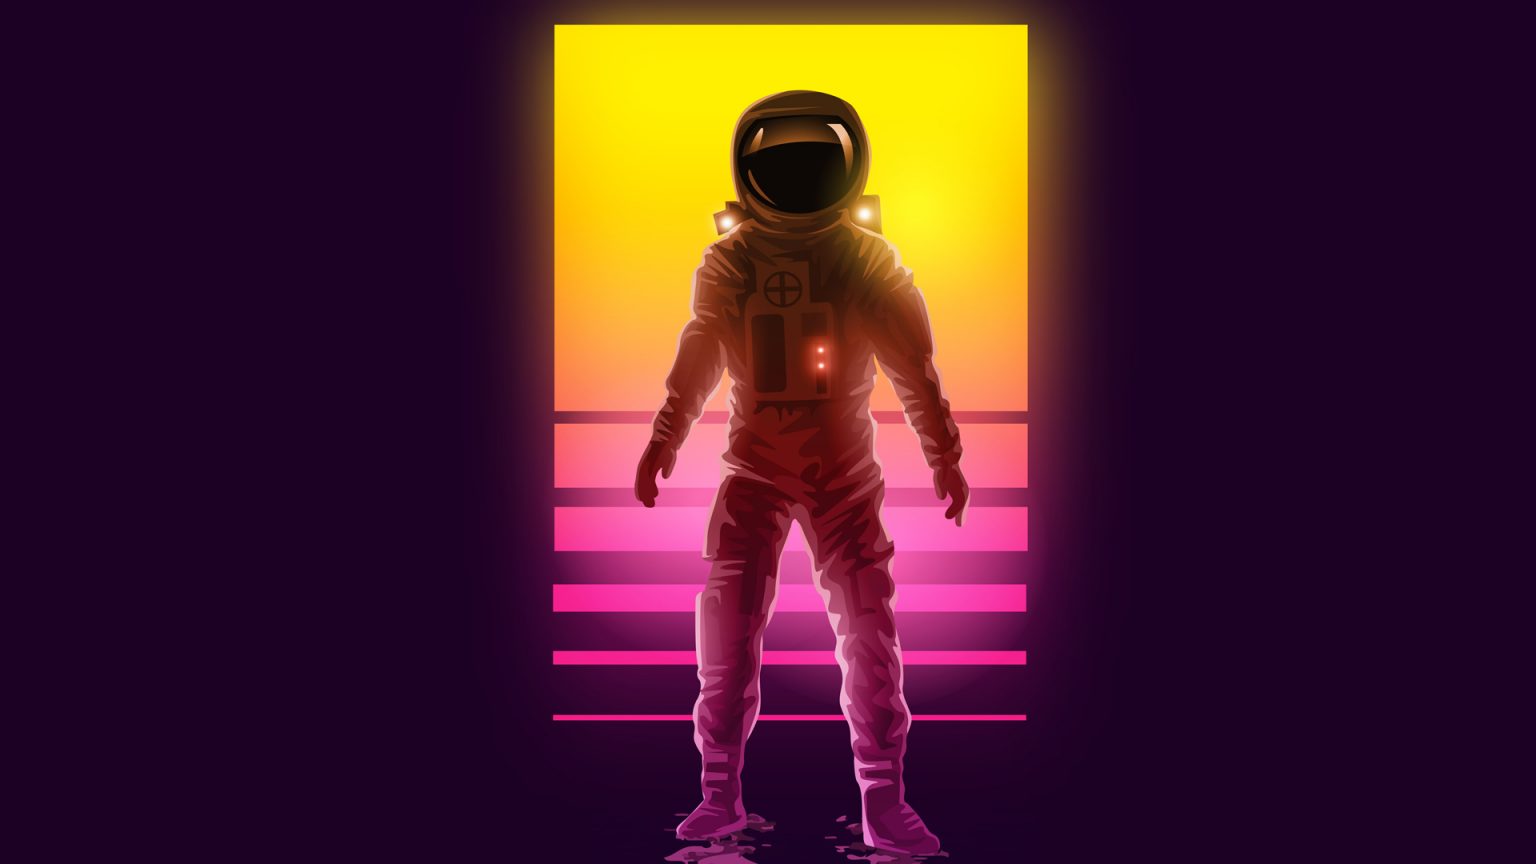 NASA invites students to design new innovative spacesuit technologies